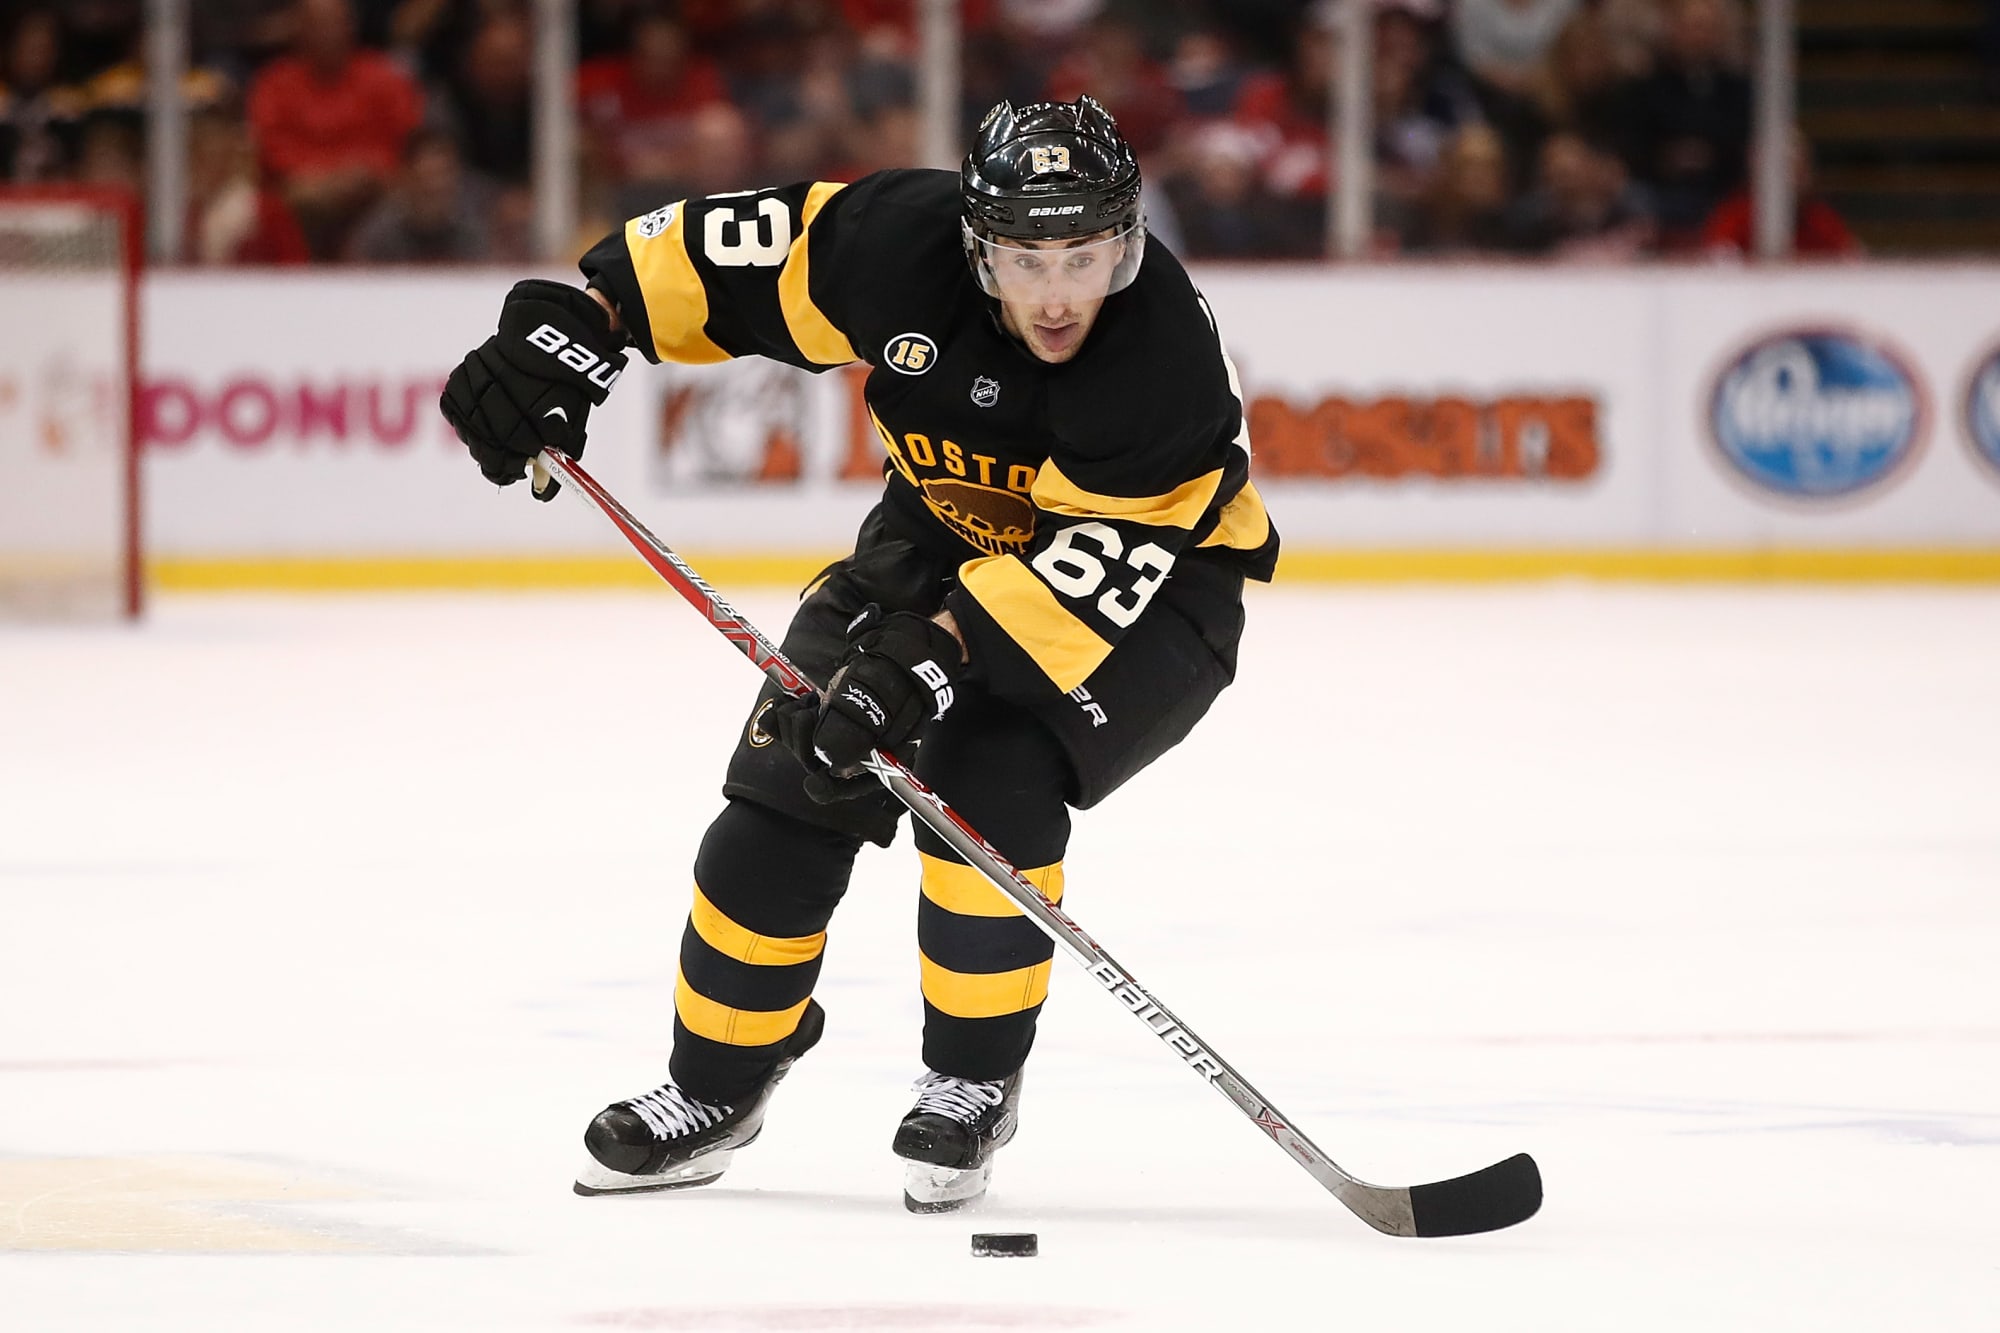 Boston Bruins: Brad Marchand named No. 3 wing in NHL